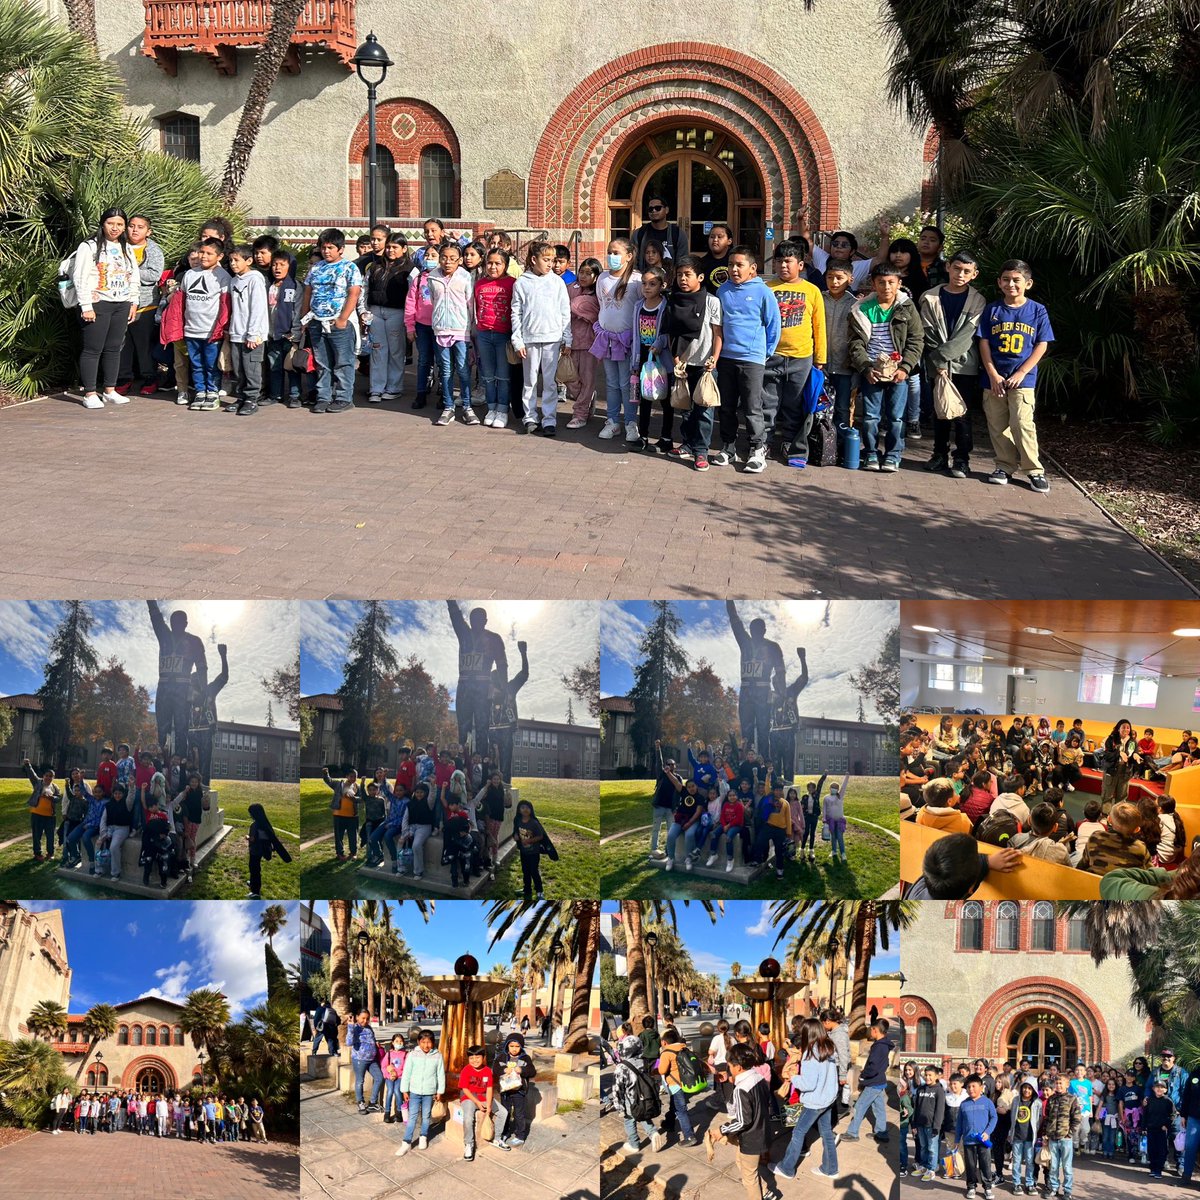 Our 3rd Grade scholars visited SJSU! Watch out Spartans our Brown Bears are in the house! Excited to create meaningful experiences that will shape the future for each of our scholars! #CCR #FutureDriven @zjgalvan @LCortezGUSD @OakBrownBears @BroarPRIDE